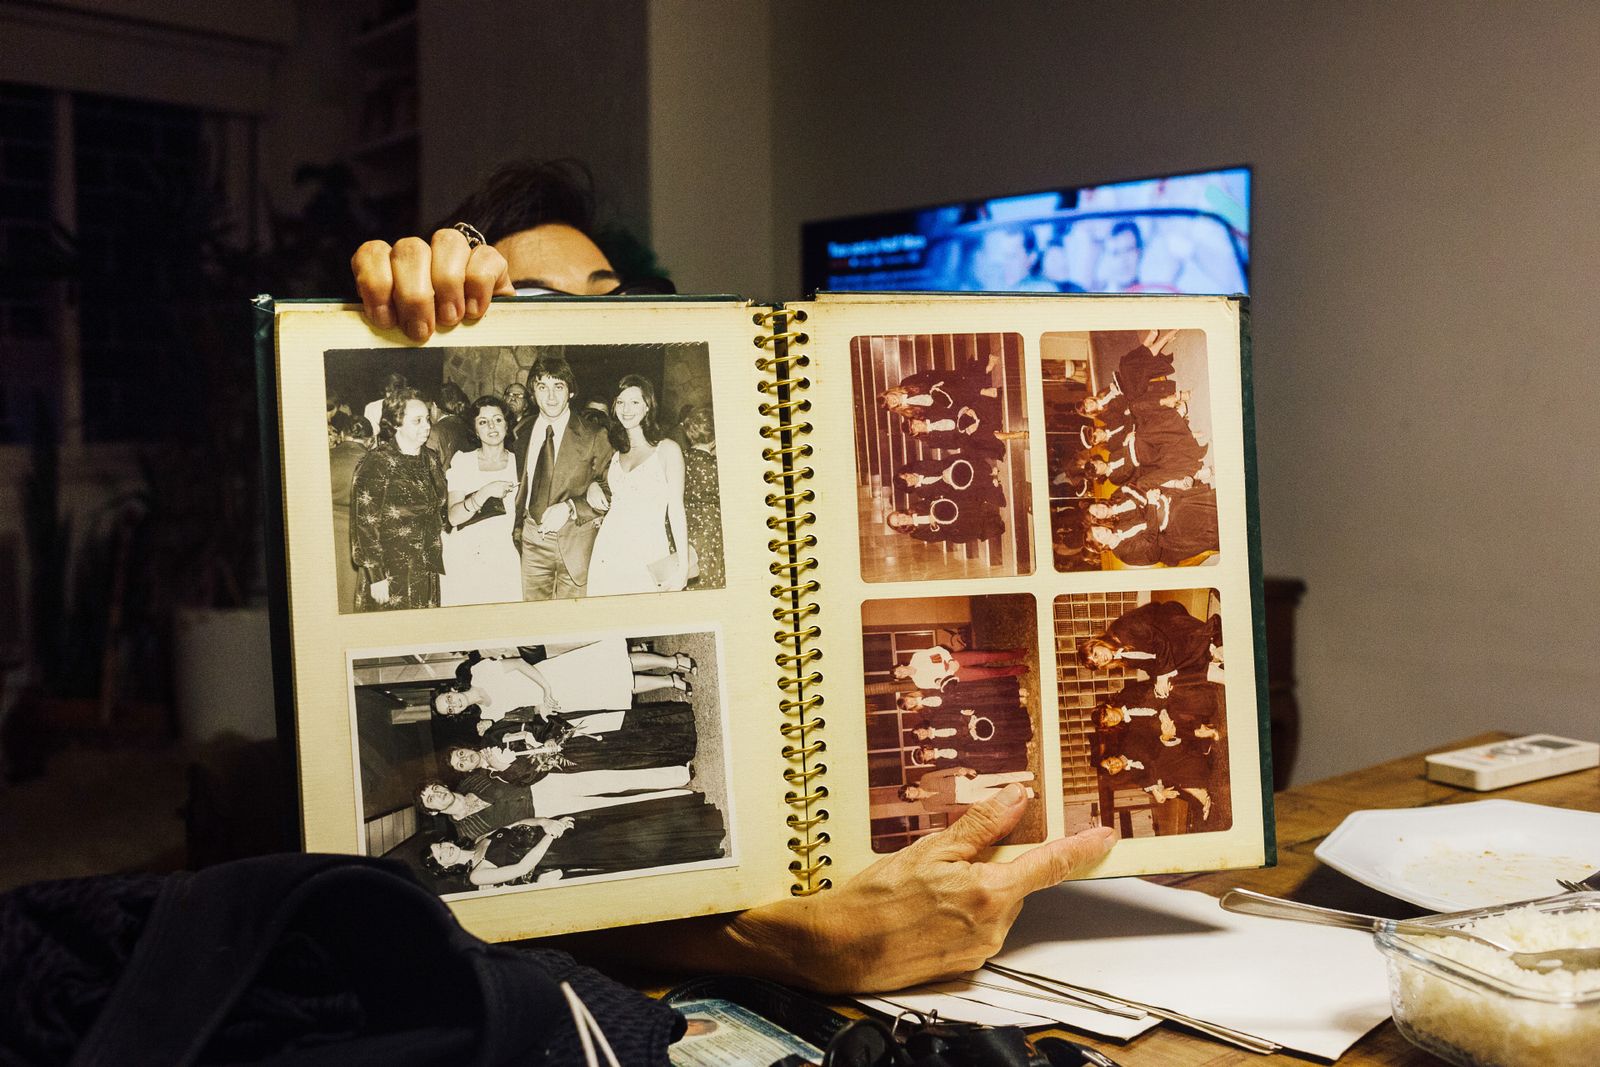 © Gabriel Carpes - My mother showing us old photos from her college days